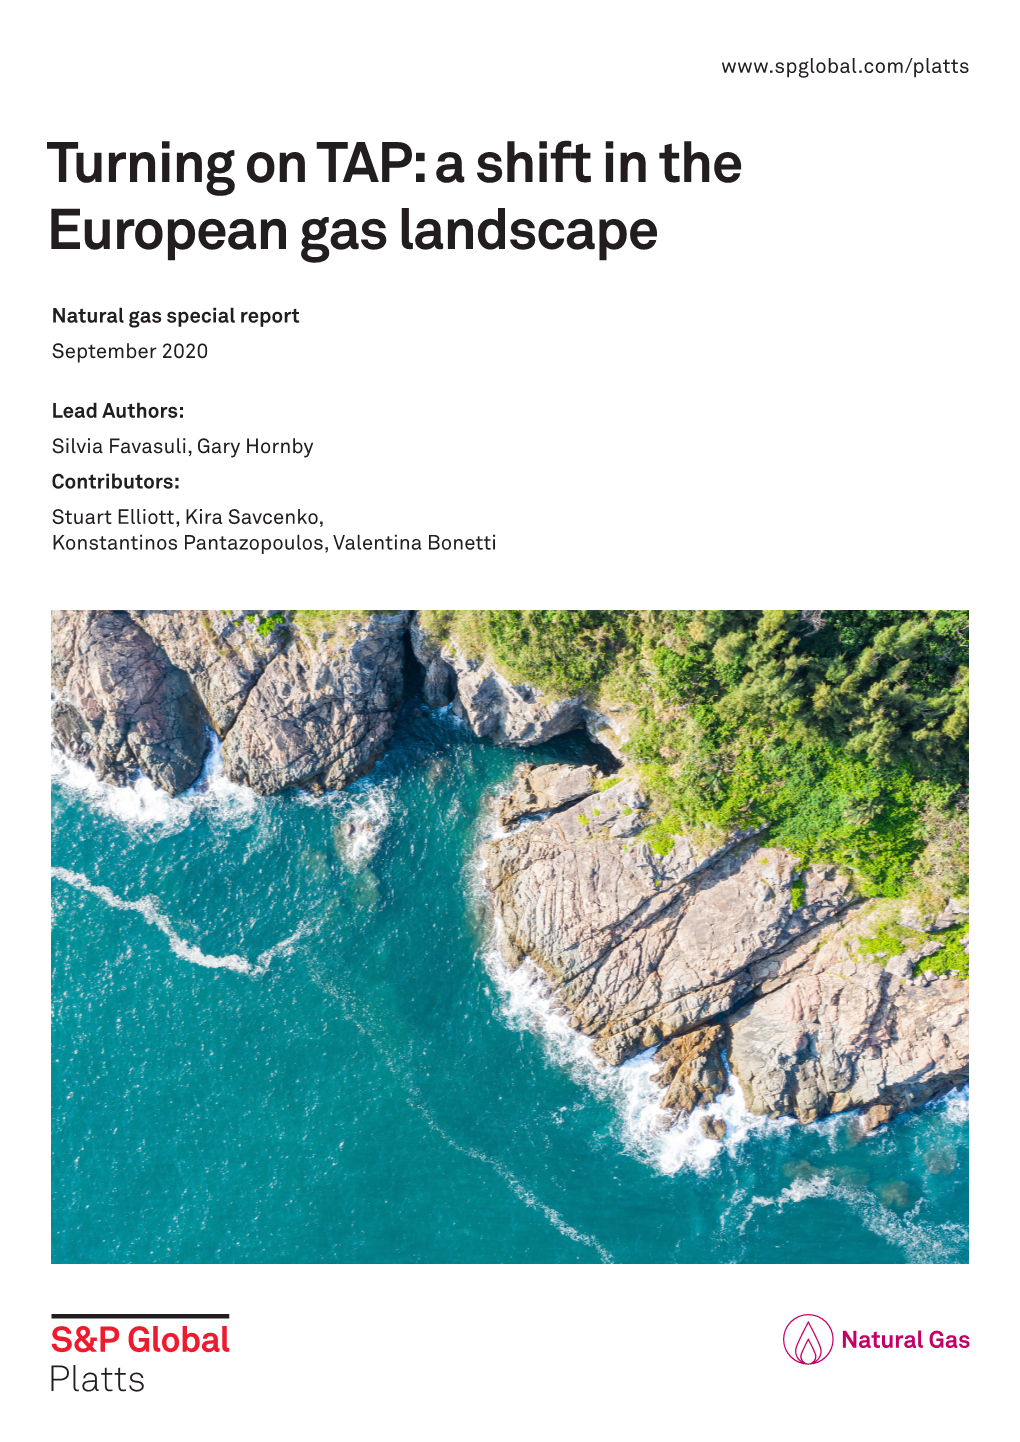 Turning on TAP: a Shift in the European Gas Landscape